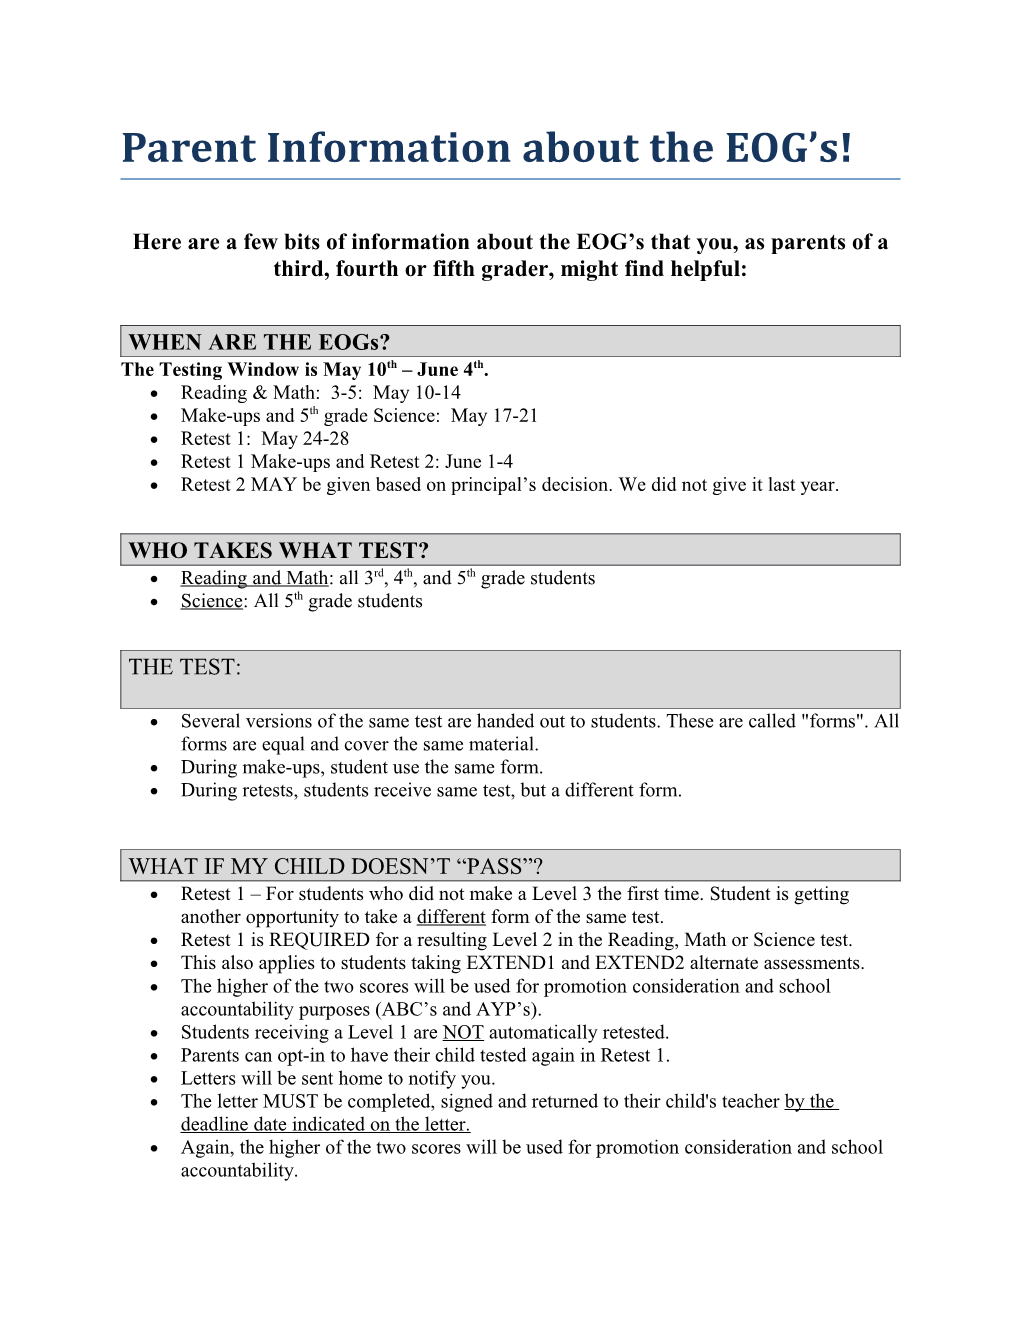 Parent Information About the EOG S!